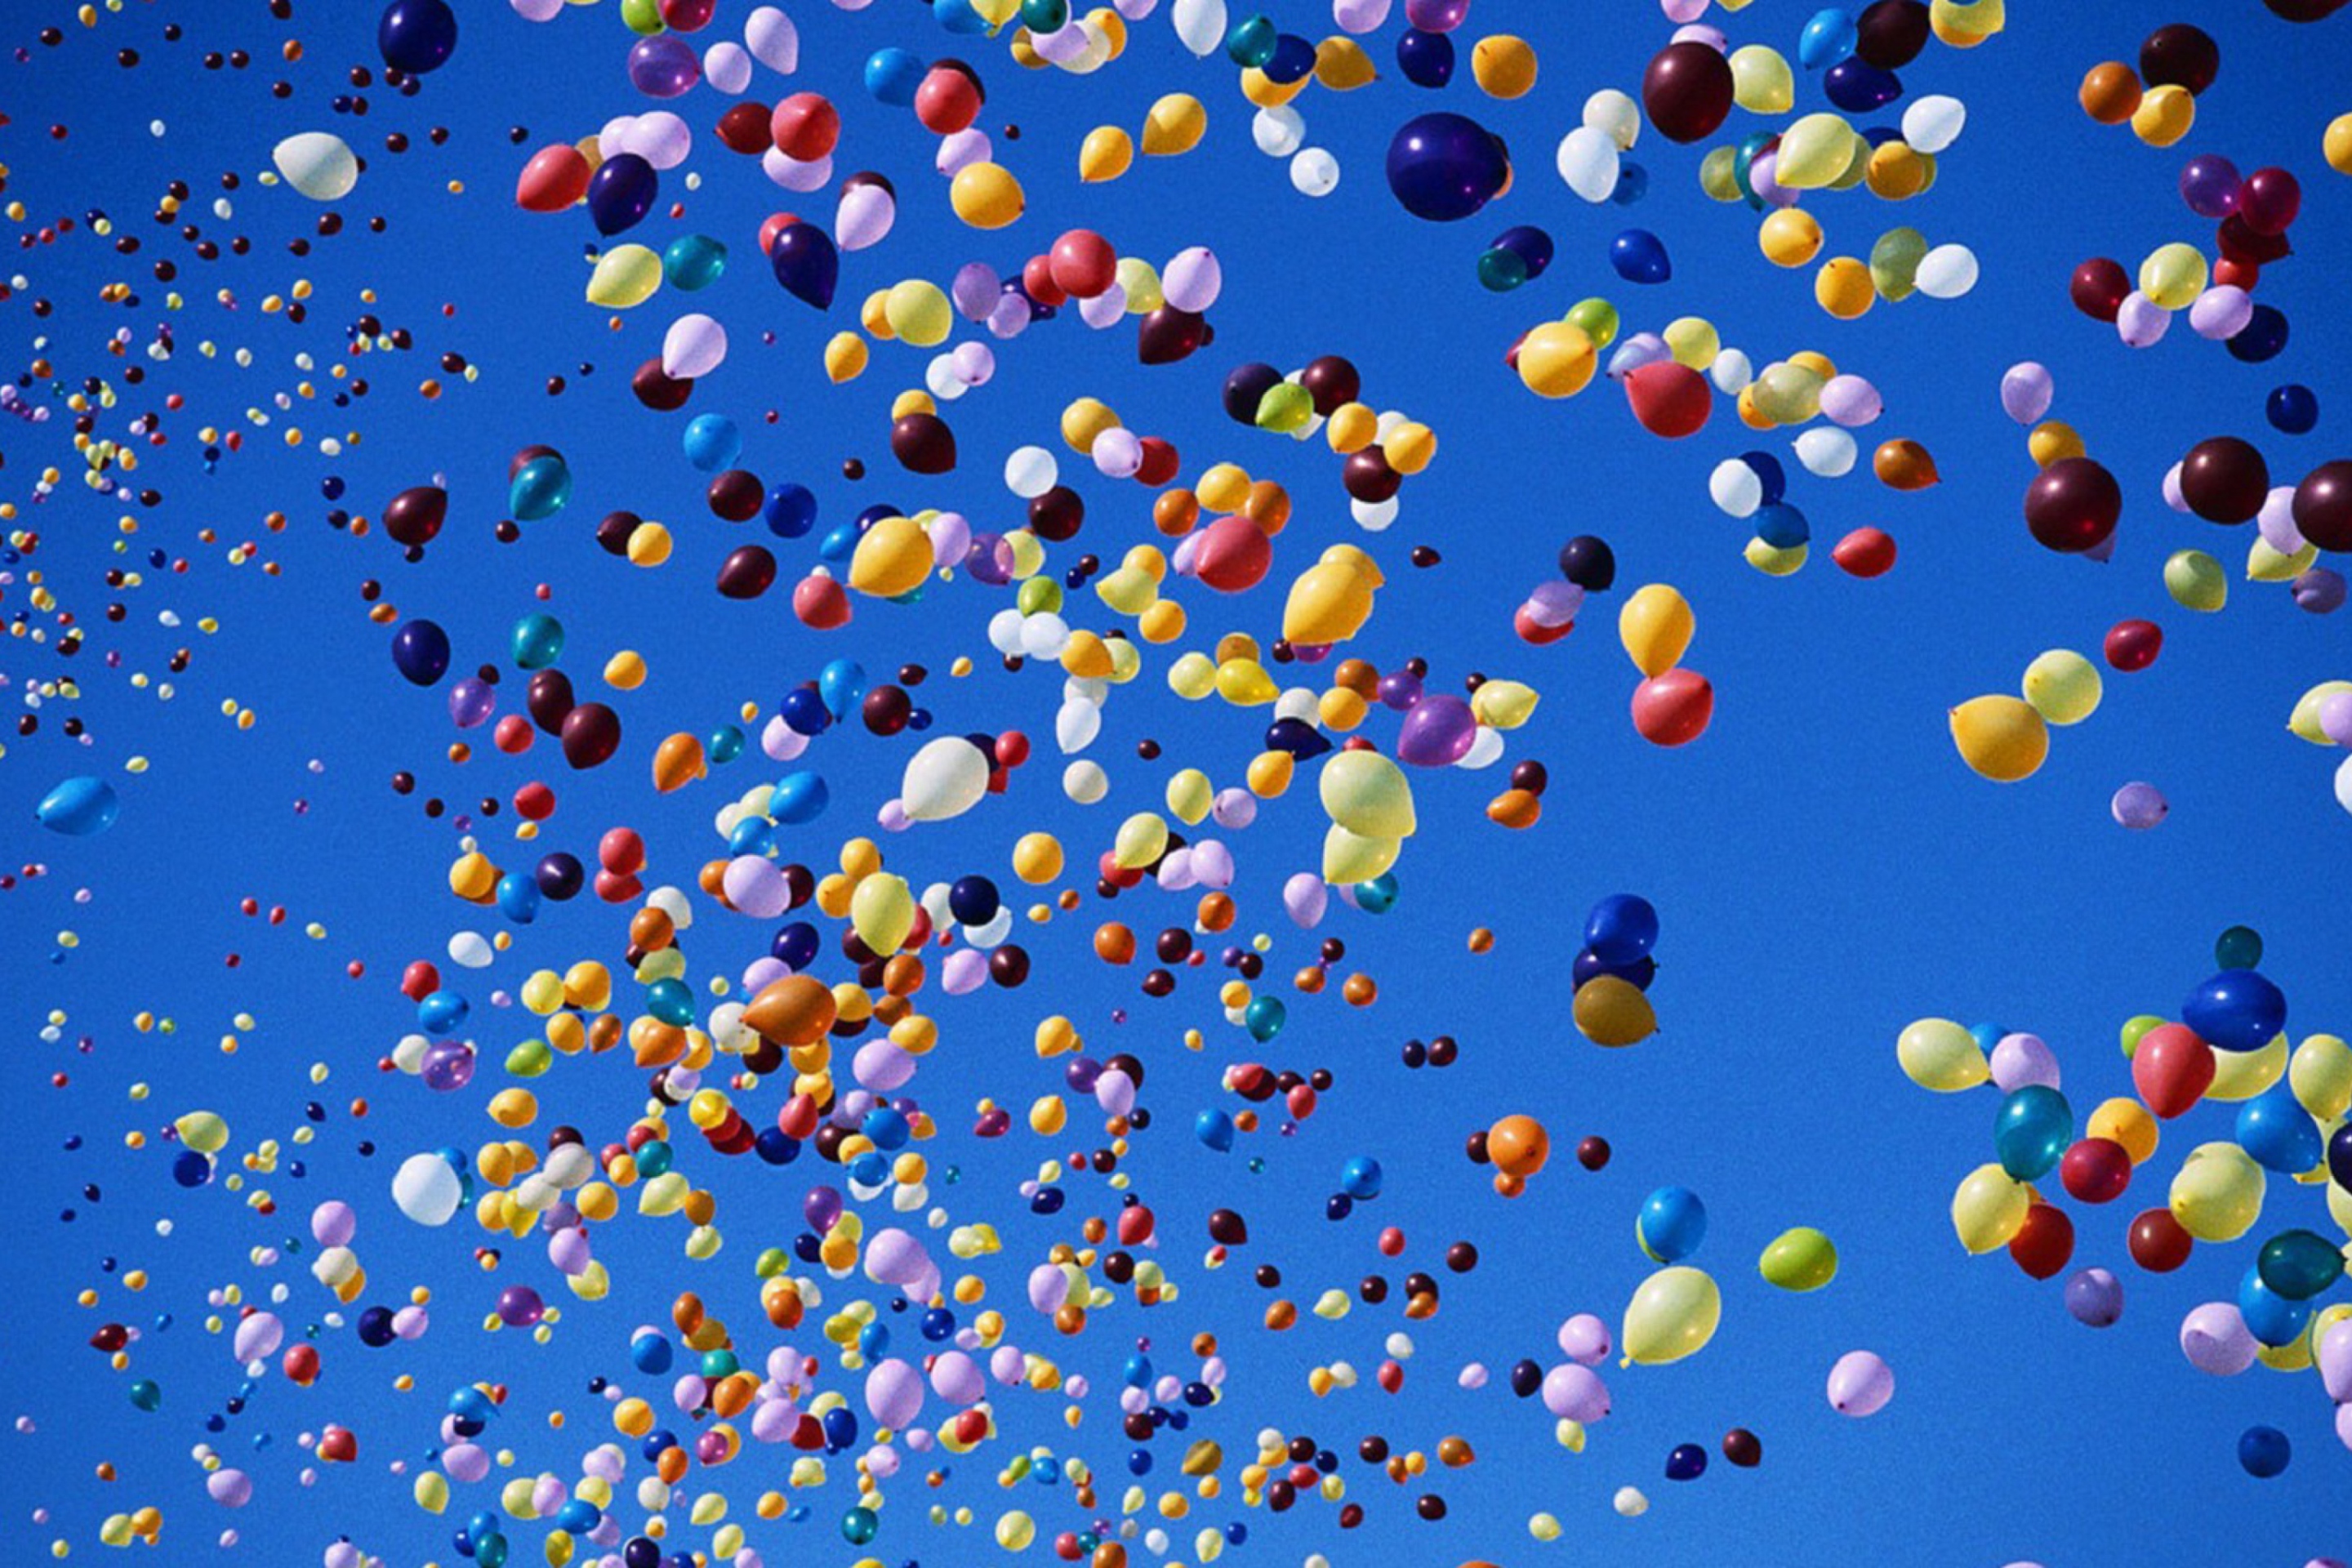 Colorful Balloons In Blue Sky wallpaper 2880x1920